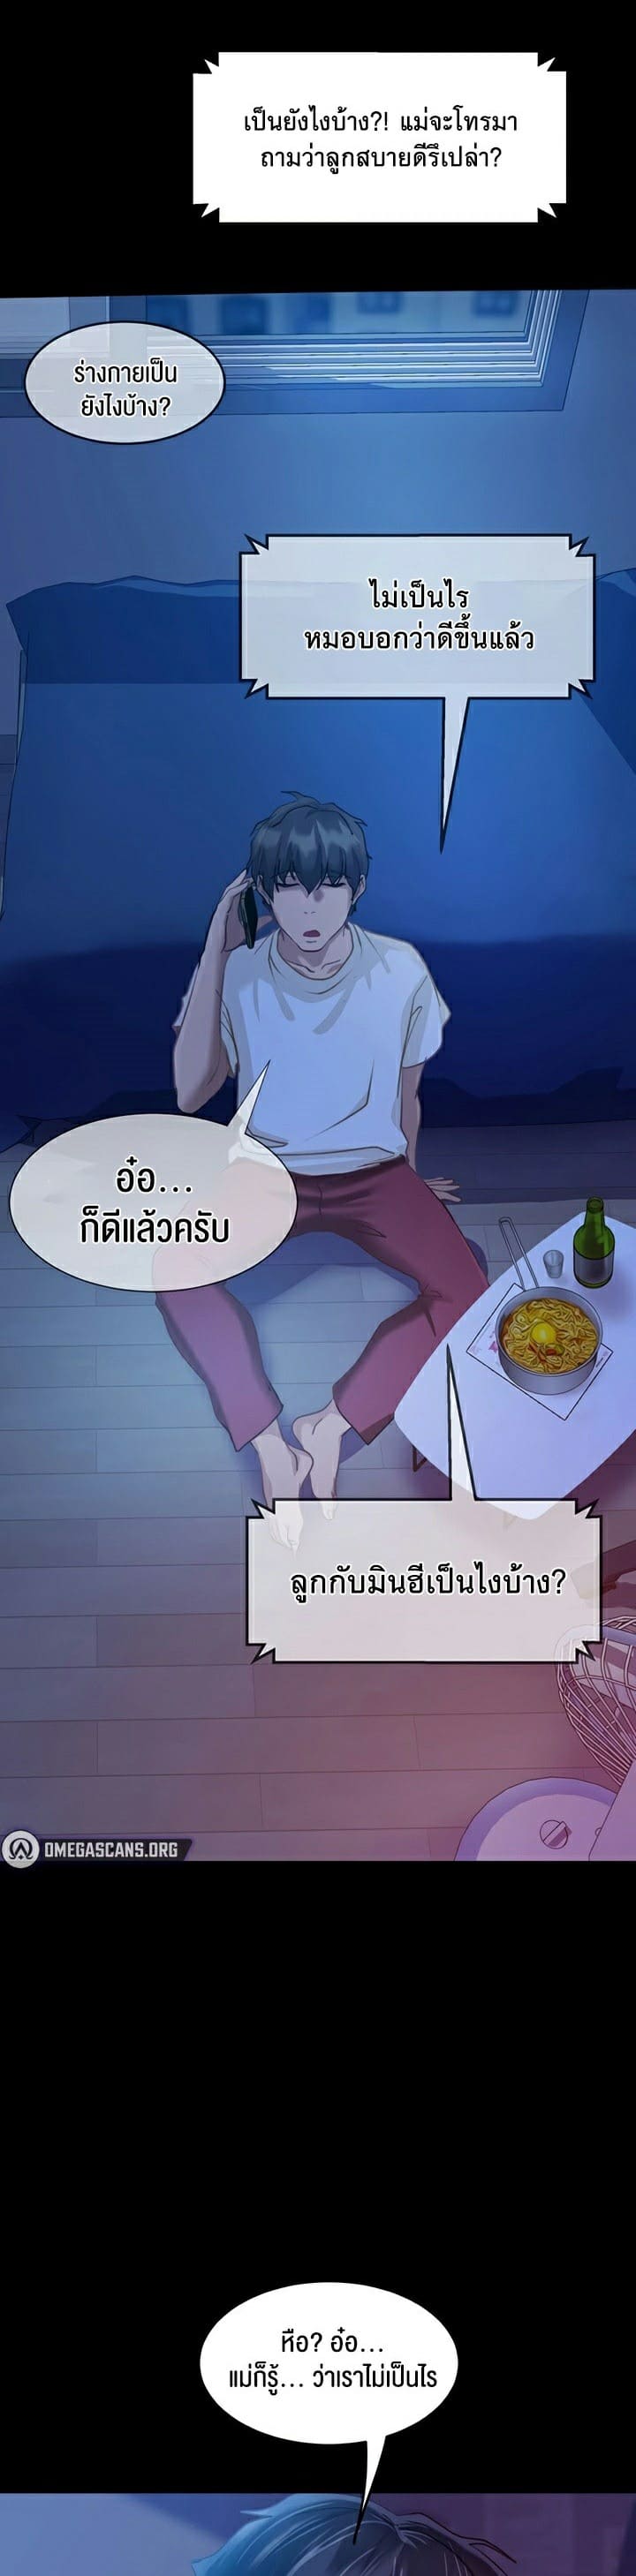 Marriage Agency Review ตอนที่ 1 ภาพ 23